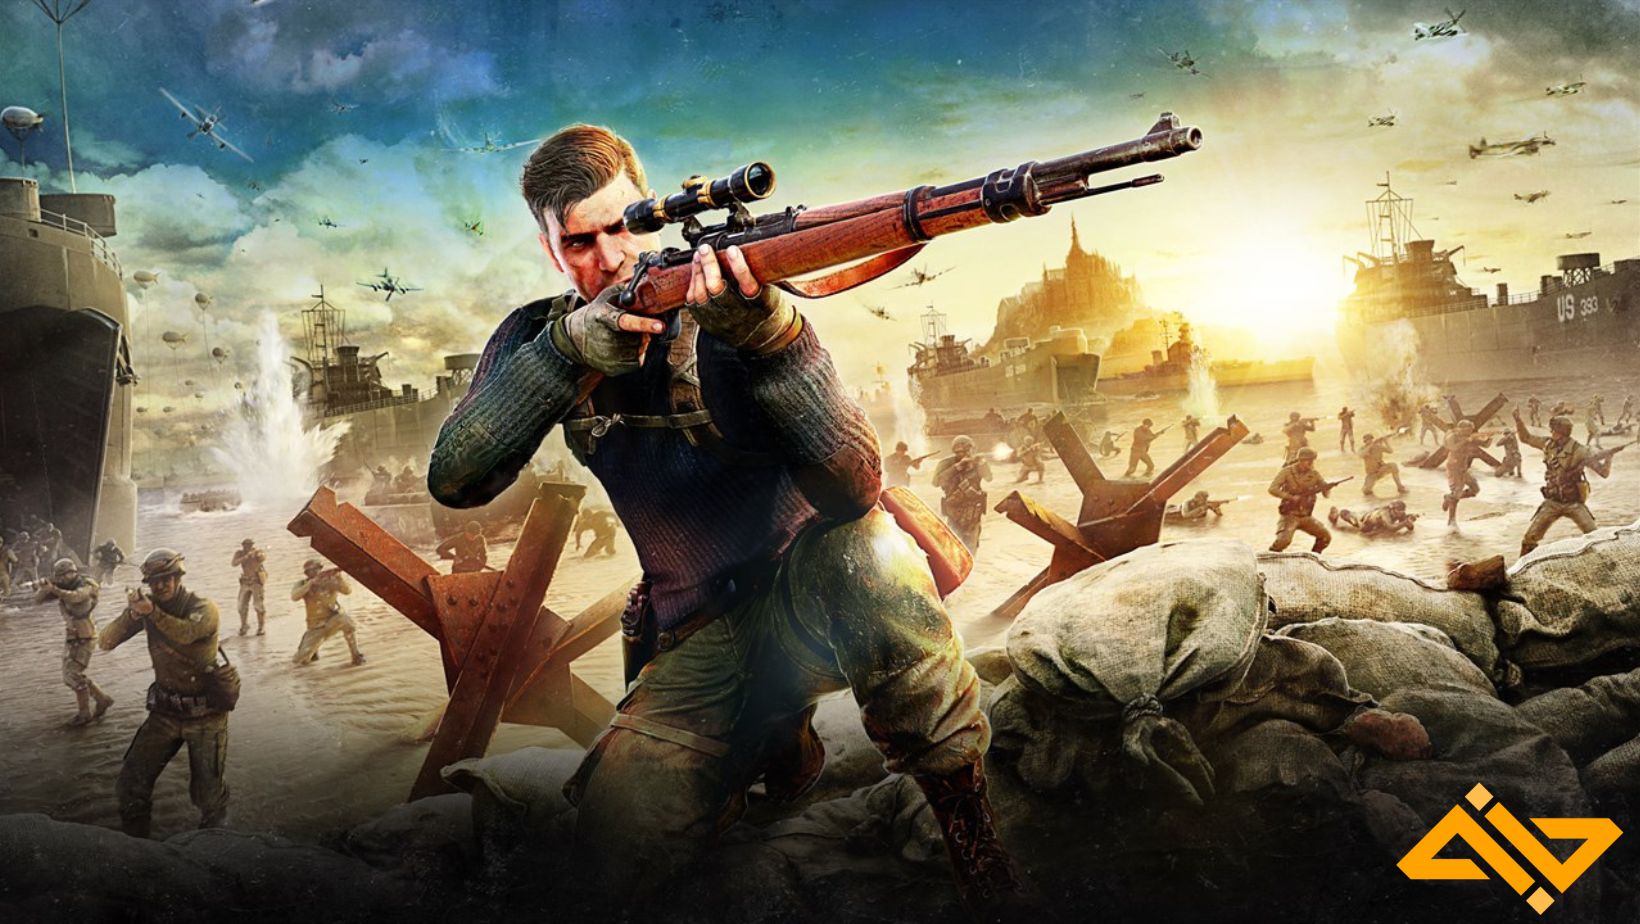 As of right now, it is the latest entry in the Sniper Elite series, and the game has everything you could hope for in a sniper game.